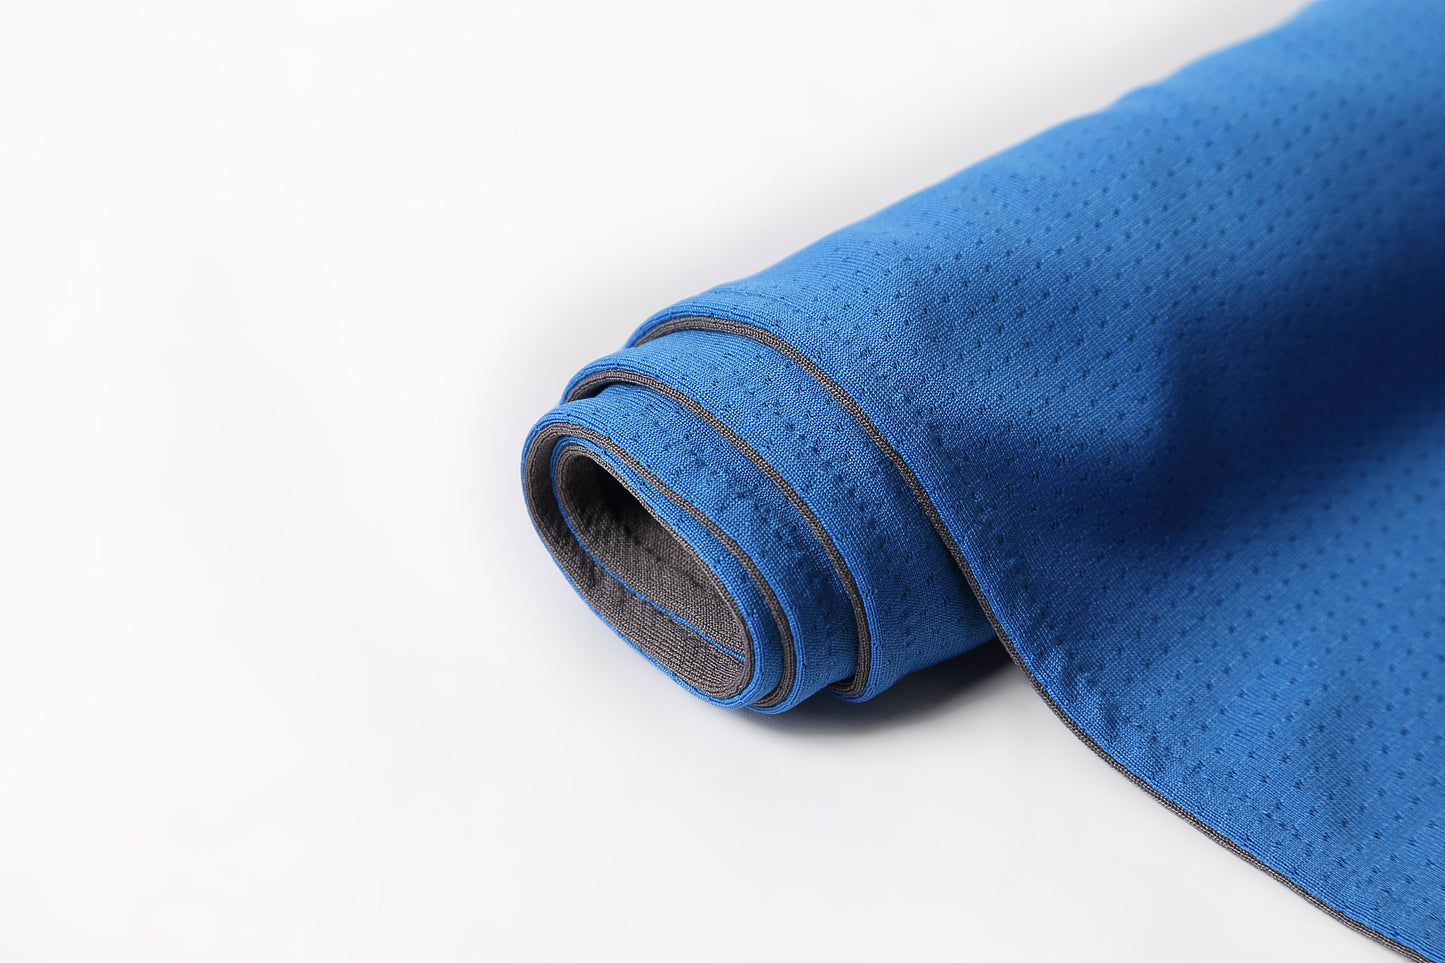 SPORX X Dry Double Layer Cooling Towel Royal Blue/Grey Maximum Instant Cooling UPF 50 Sun Protection, Yoga, Golf, Gym, Neck, Workout